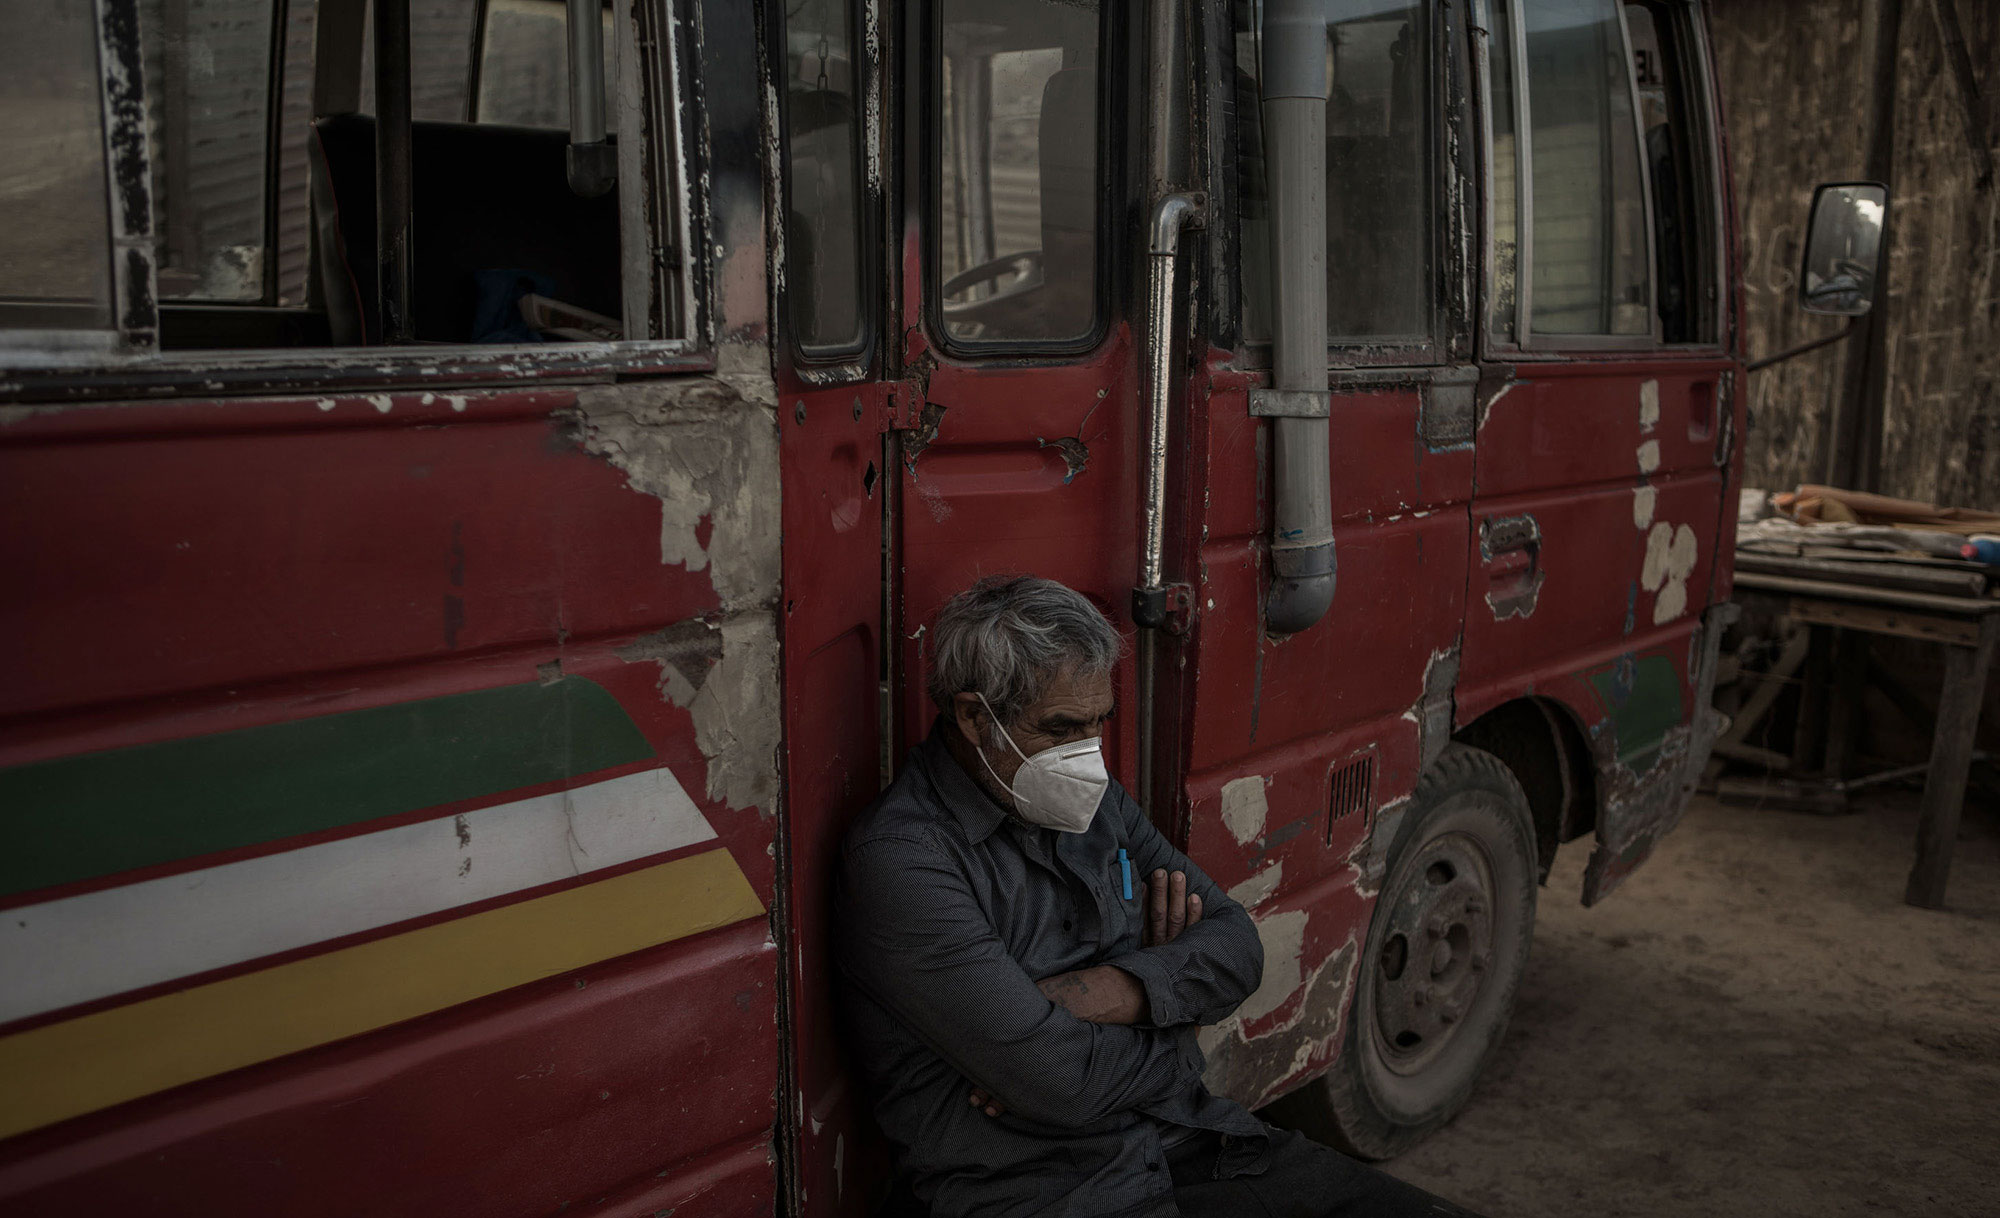 A man in a medical face mask sits and leans against a red vehicle.